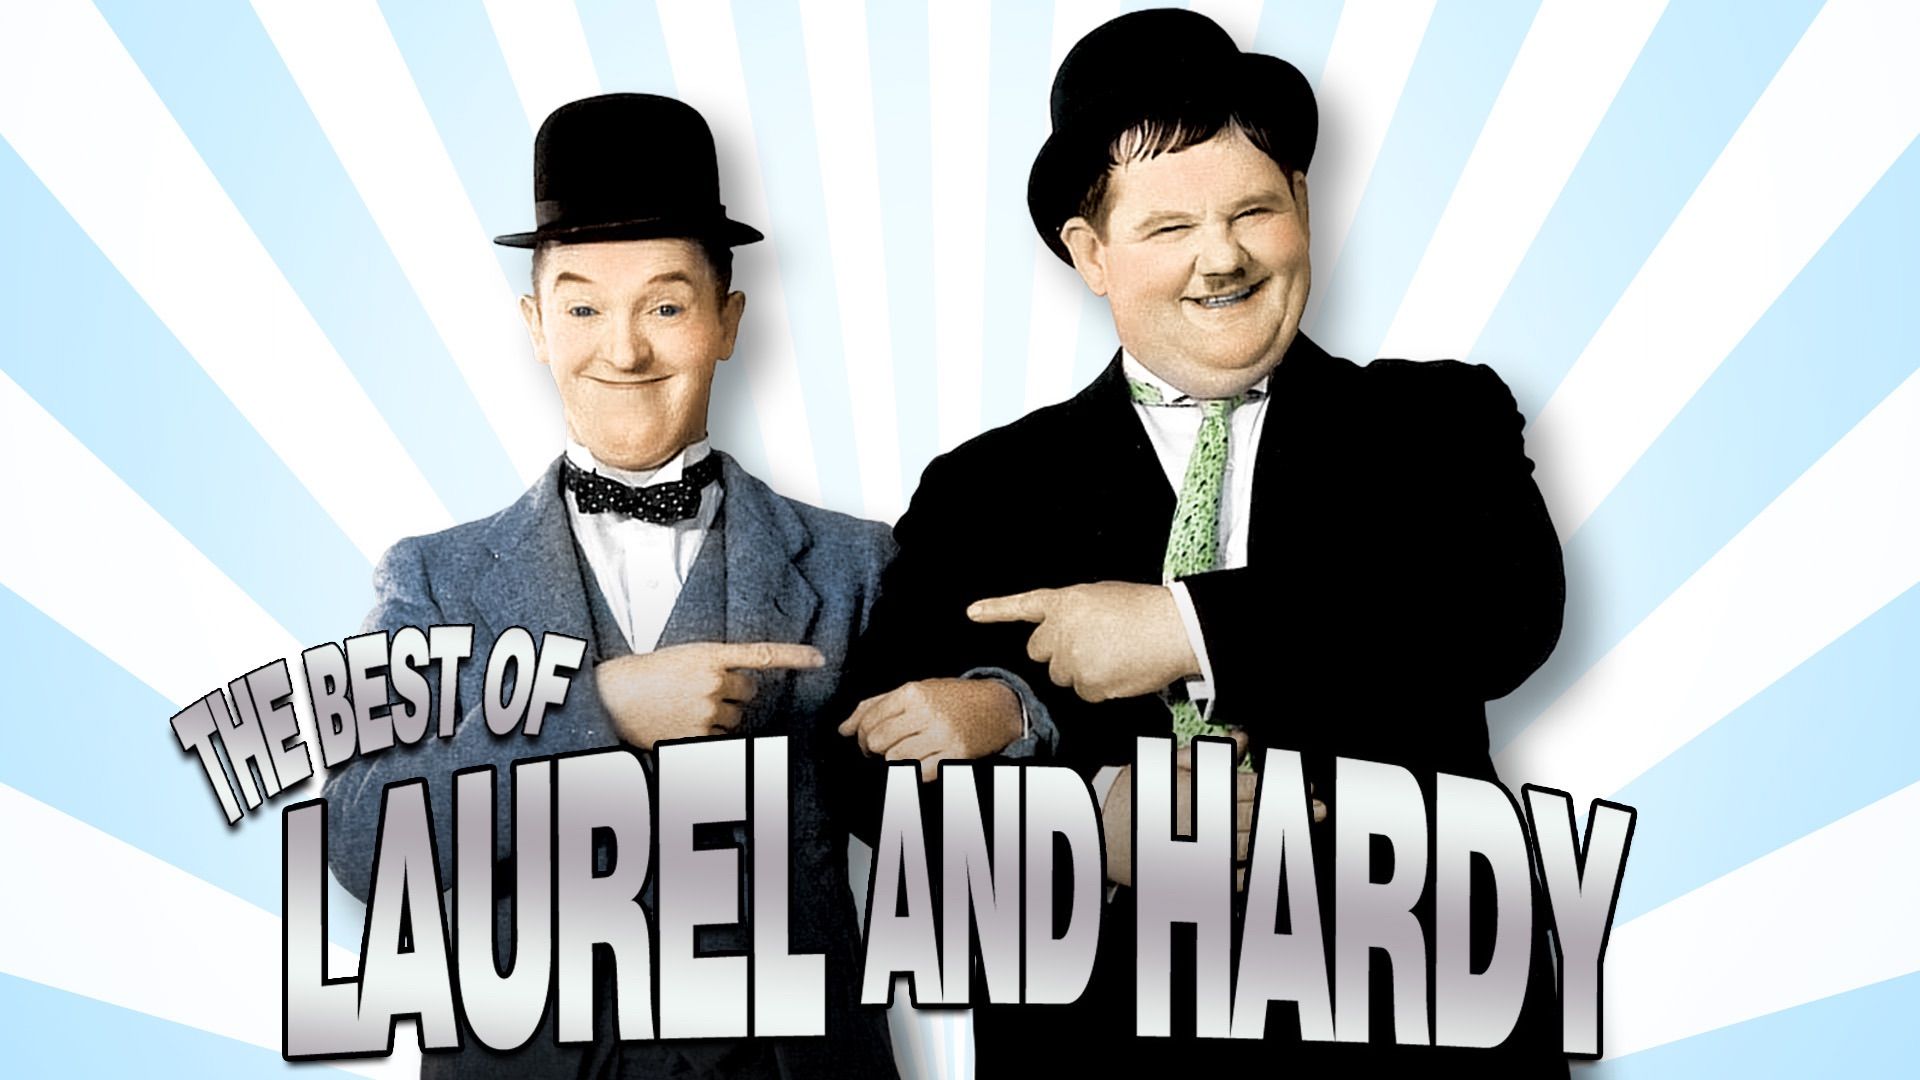 The Best of Laurel and Hardy Backdrop